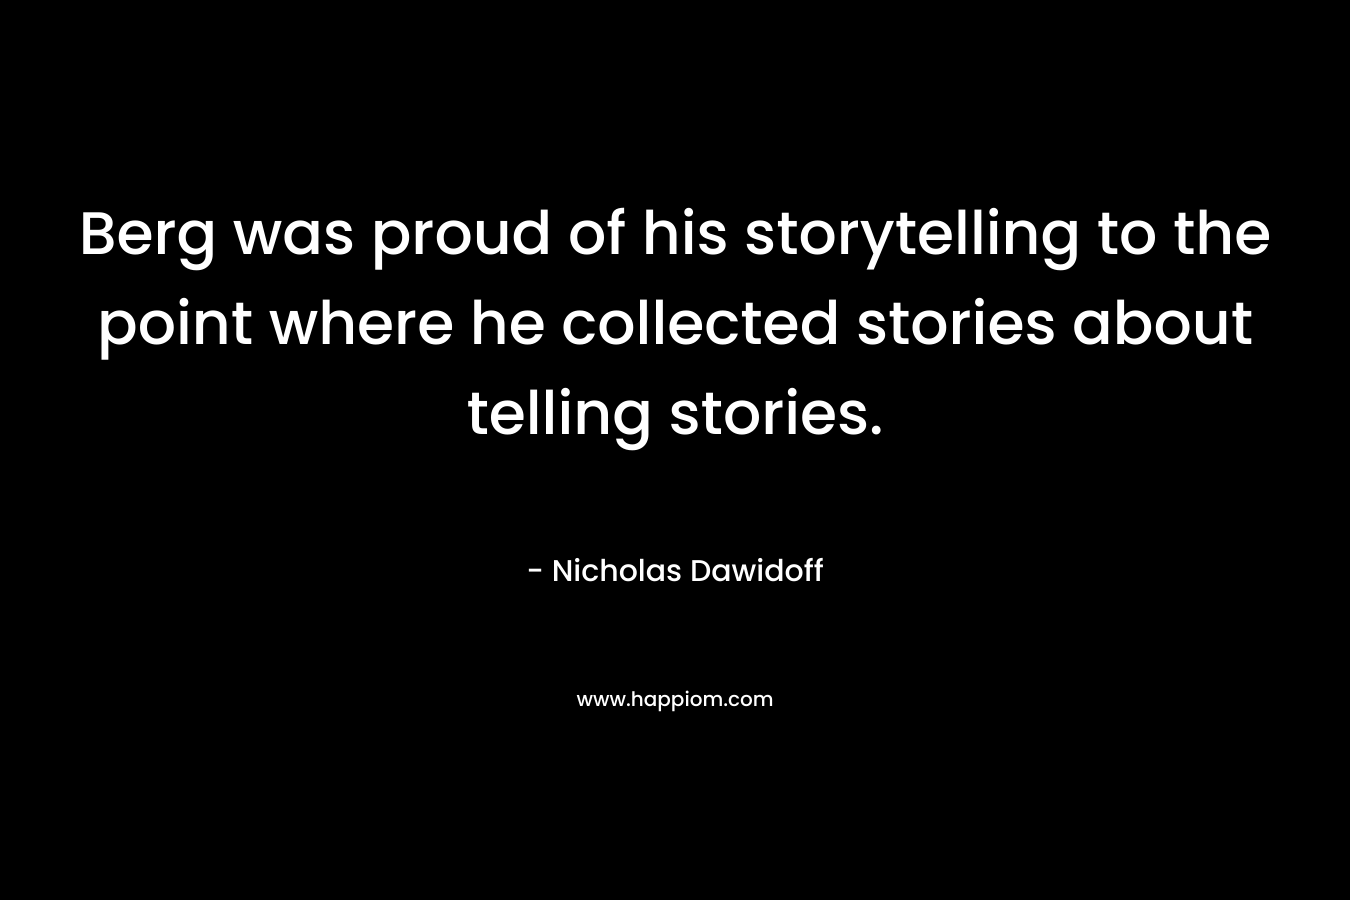 Berg was proud of his storytelling to the point where he collected stories about telling stories. – Nicholas Dawidoff